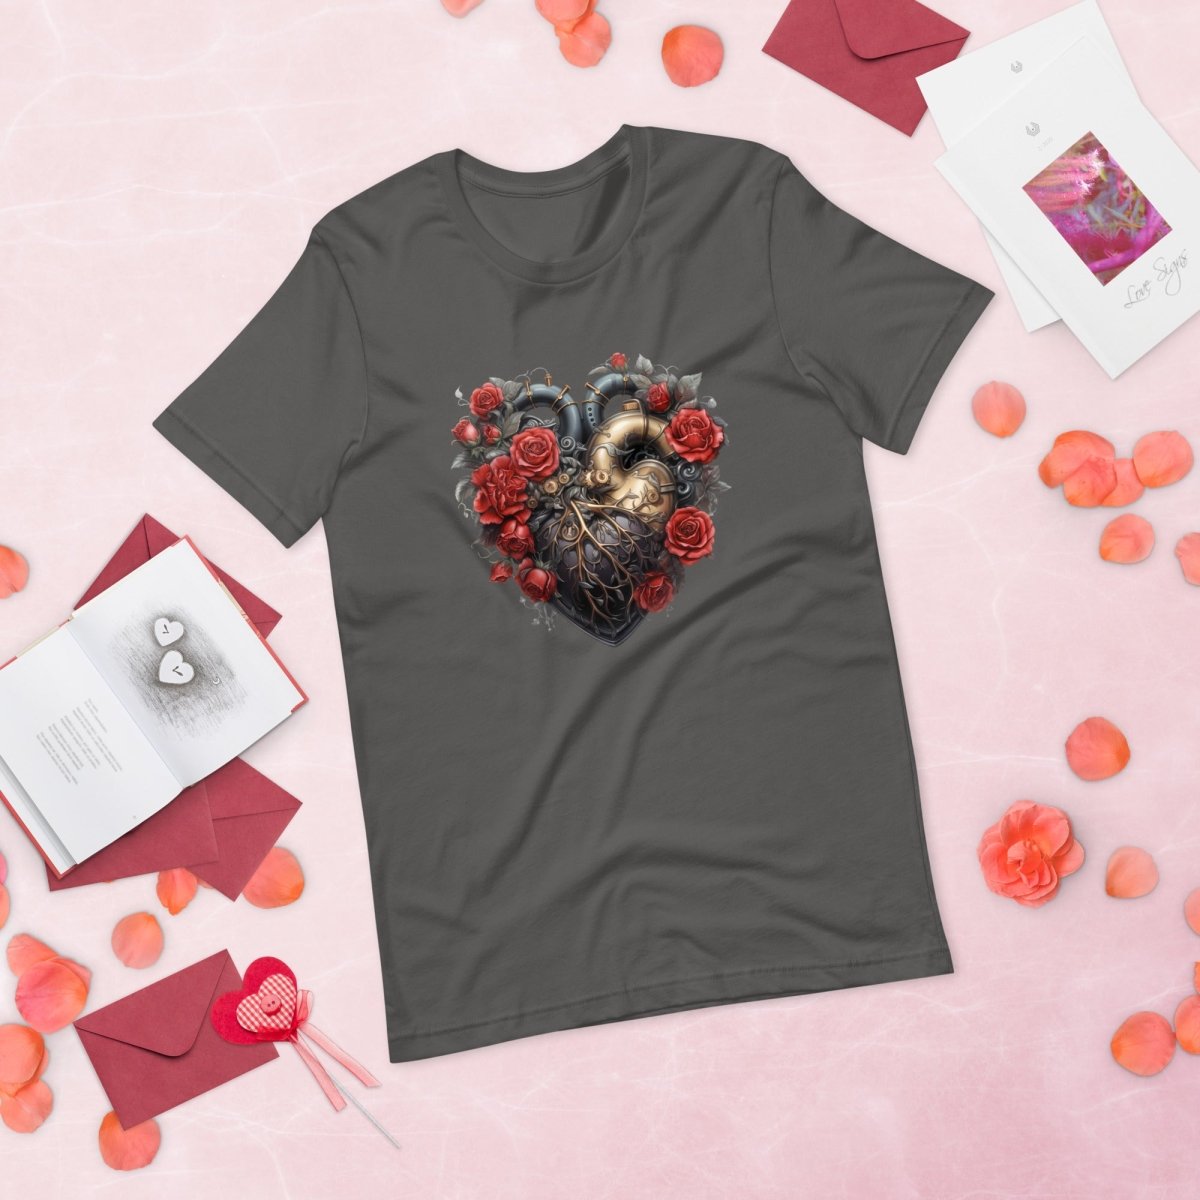 Steam Punk Heart T-Shirt High Quality Floral Heart Valentines Day Shirt Love Gift for Her Love Tee Gothic Heart Tee Love Shirt Dark Love - Everything Pixel